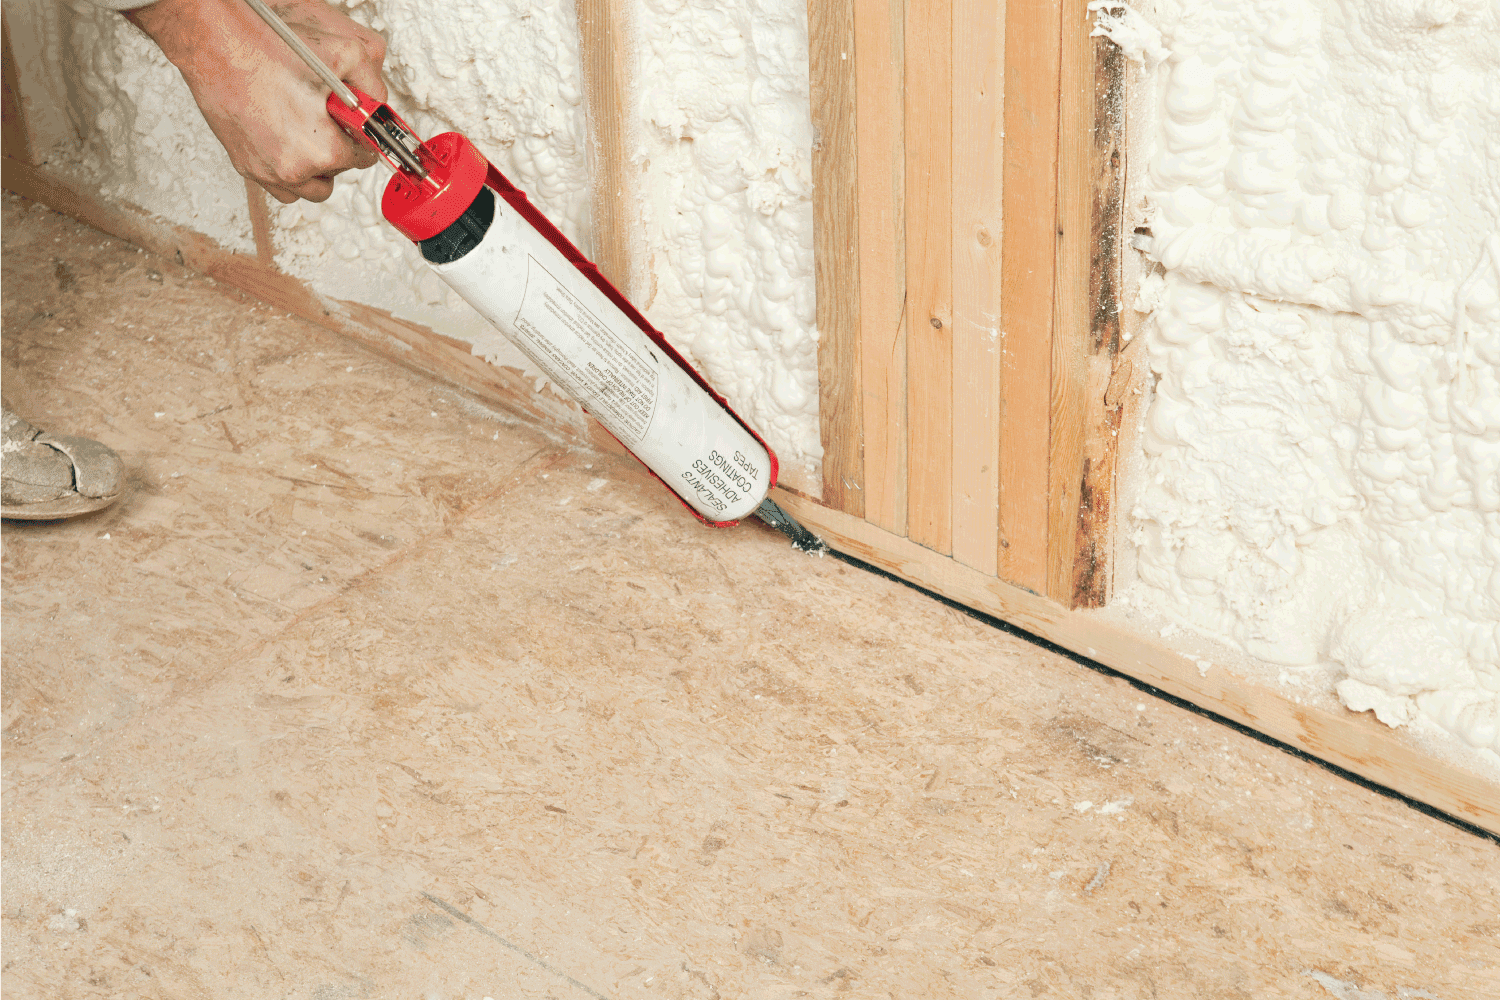 A construction worker is applying butyl sealant caulk to gaps between wall plate and OSB subfloor at a house